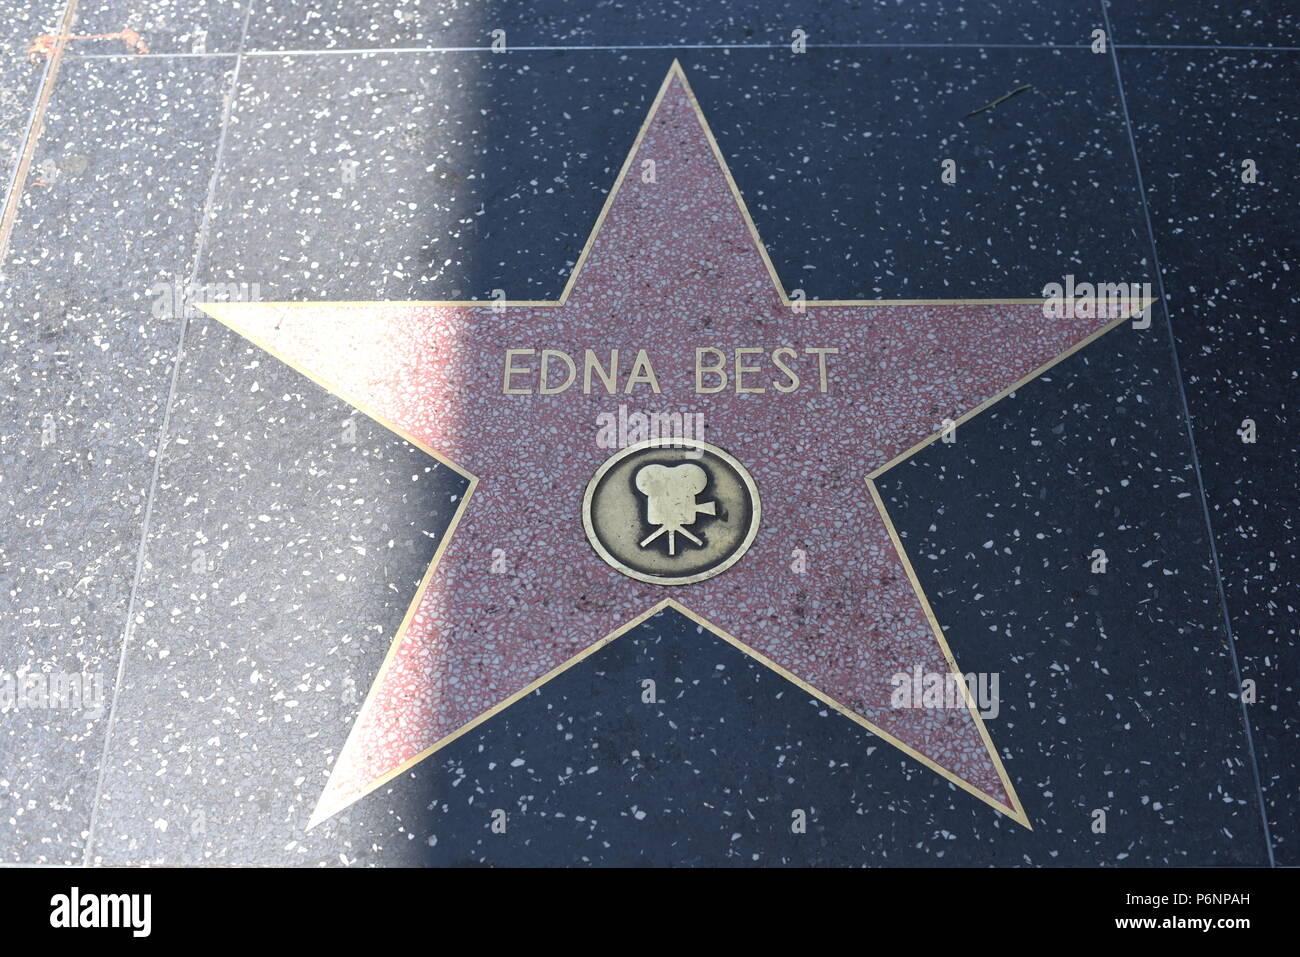 HOLLYWOOD, CA - June 29: Edna Best star on the Hollywood Walk of Fame in Hollywood, California on June 29, 2018. Stock Photo